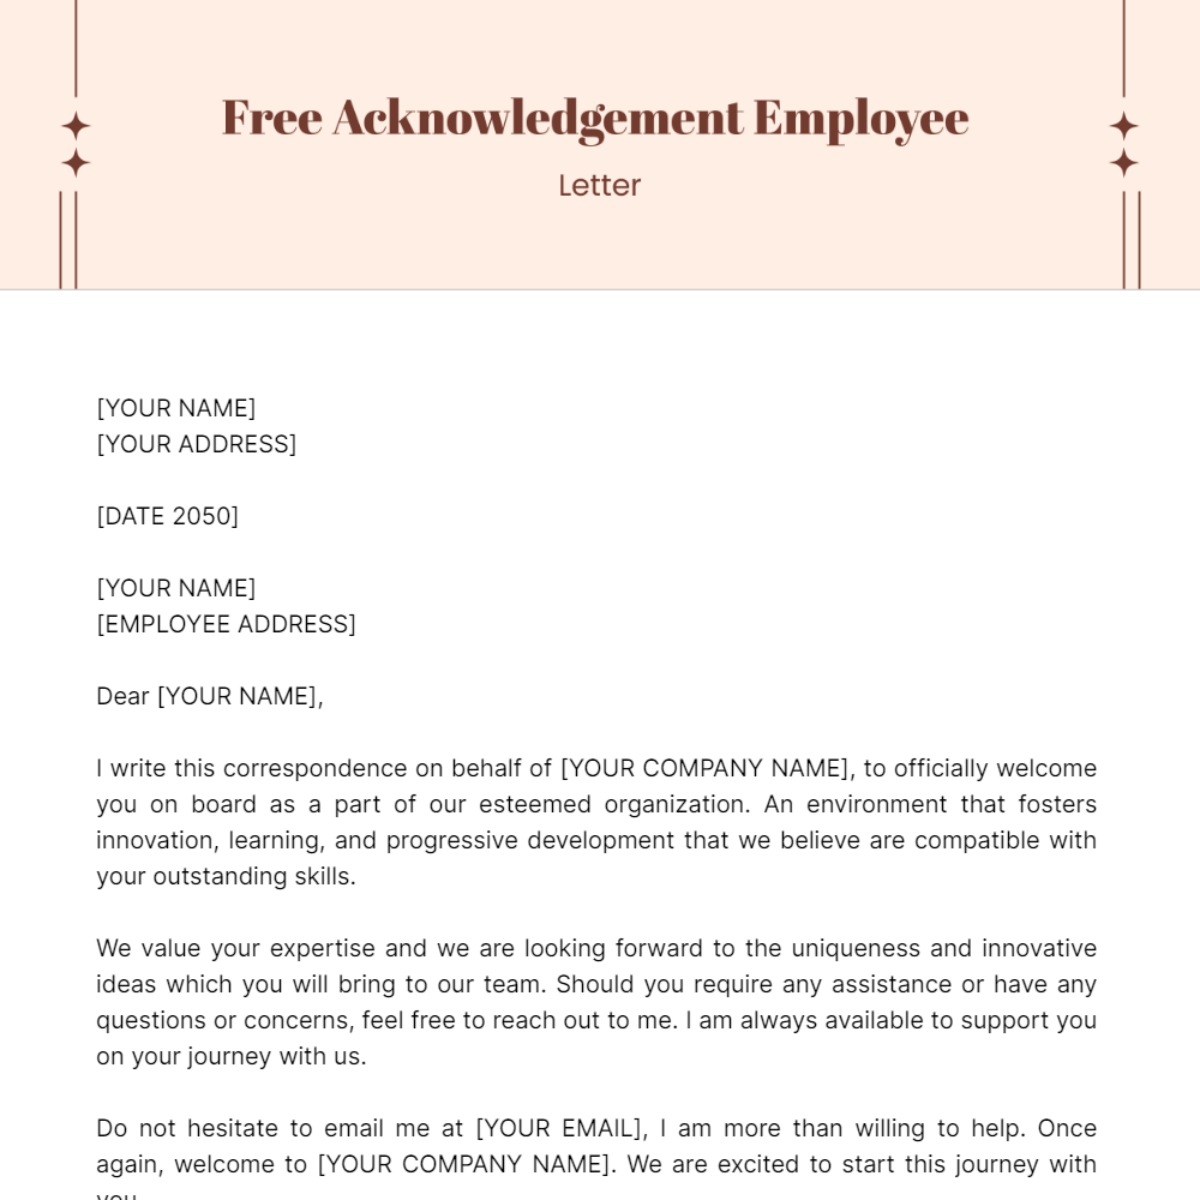 Acknowledgement Employee Letter Template